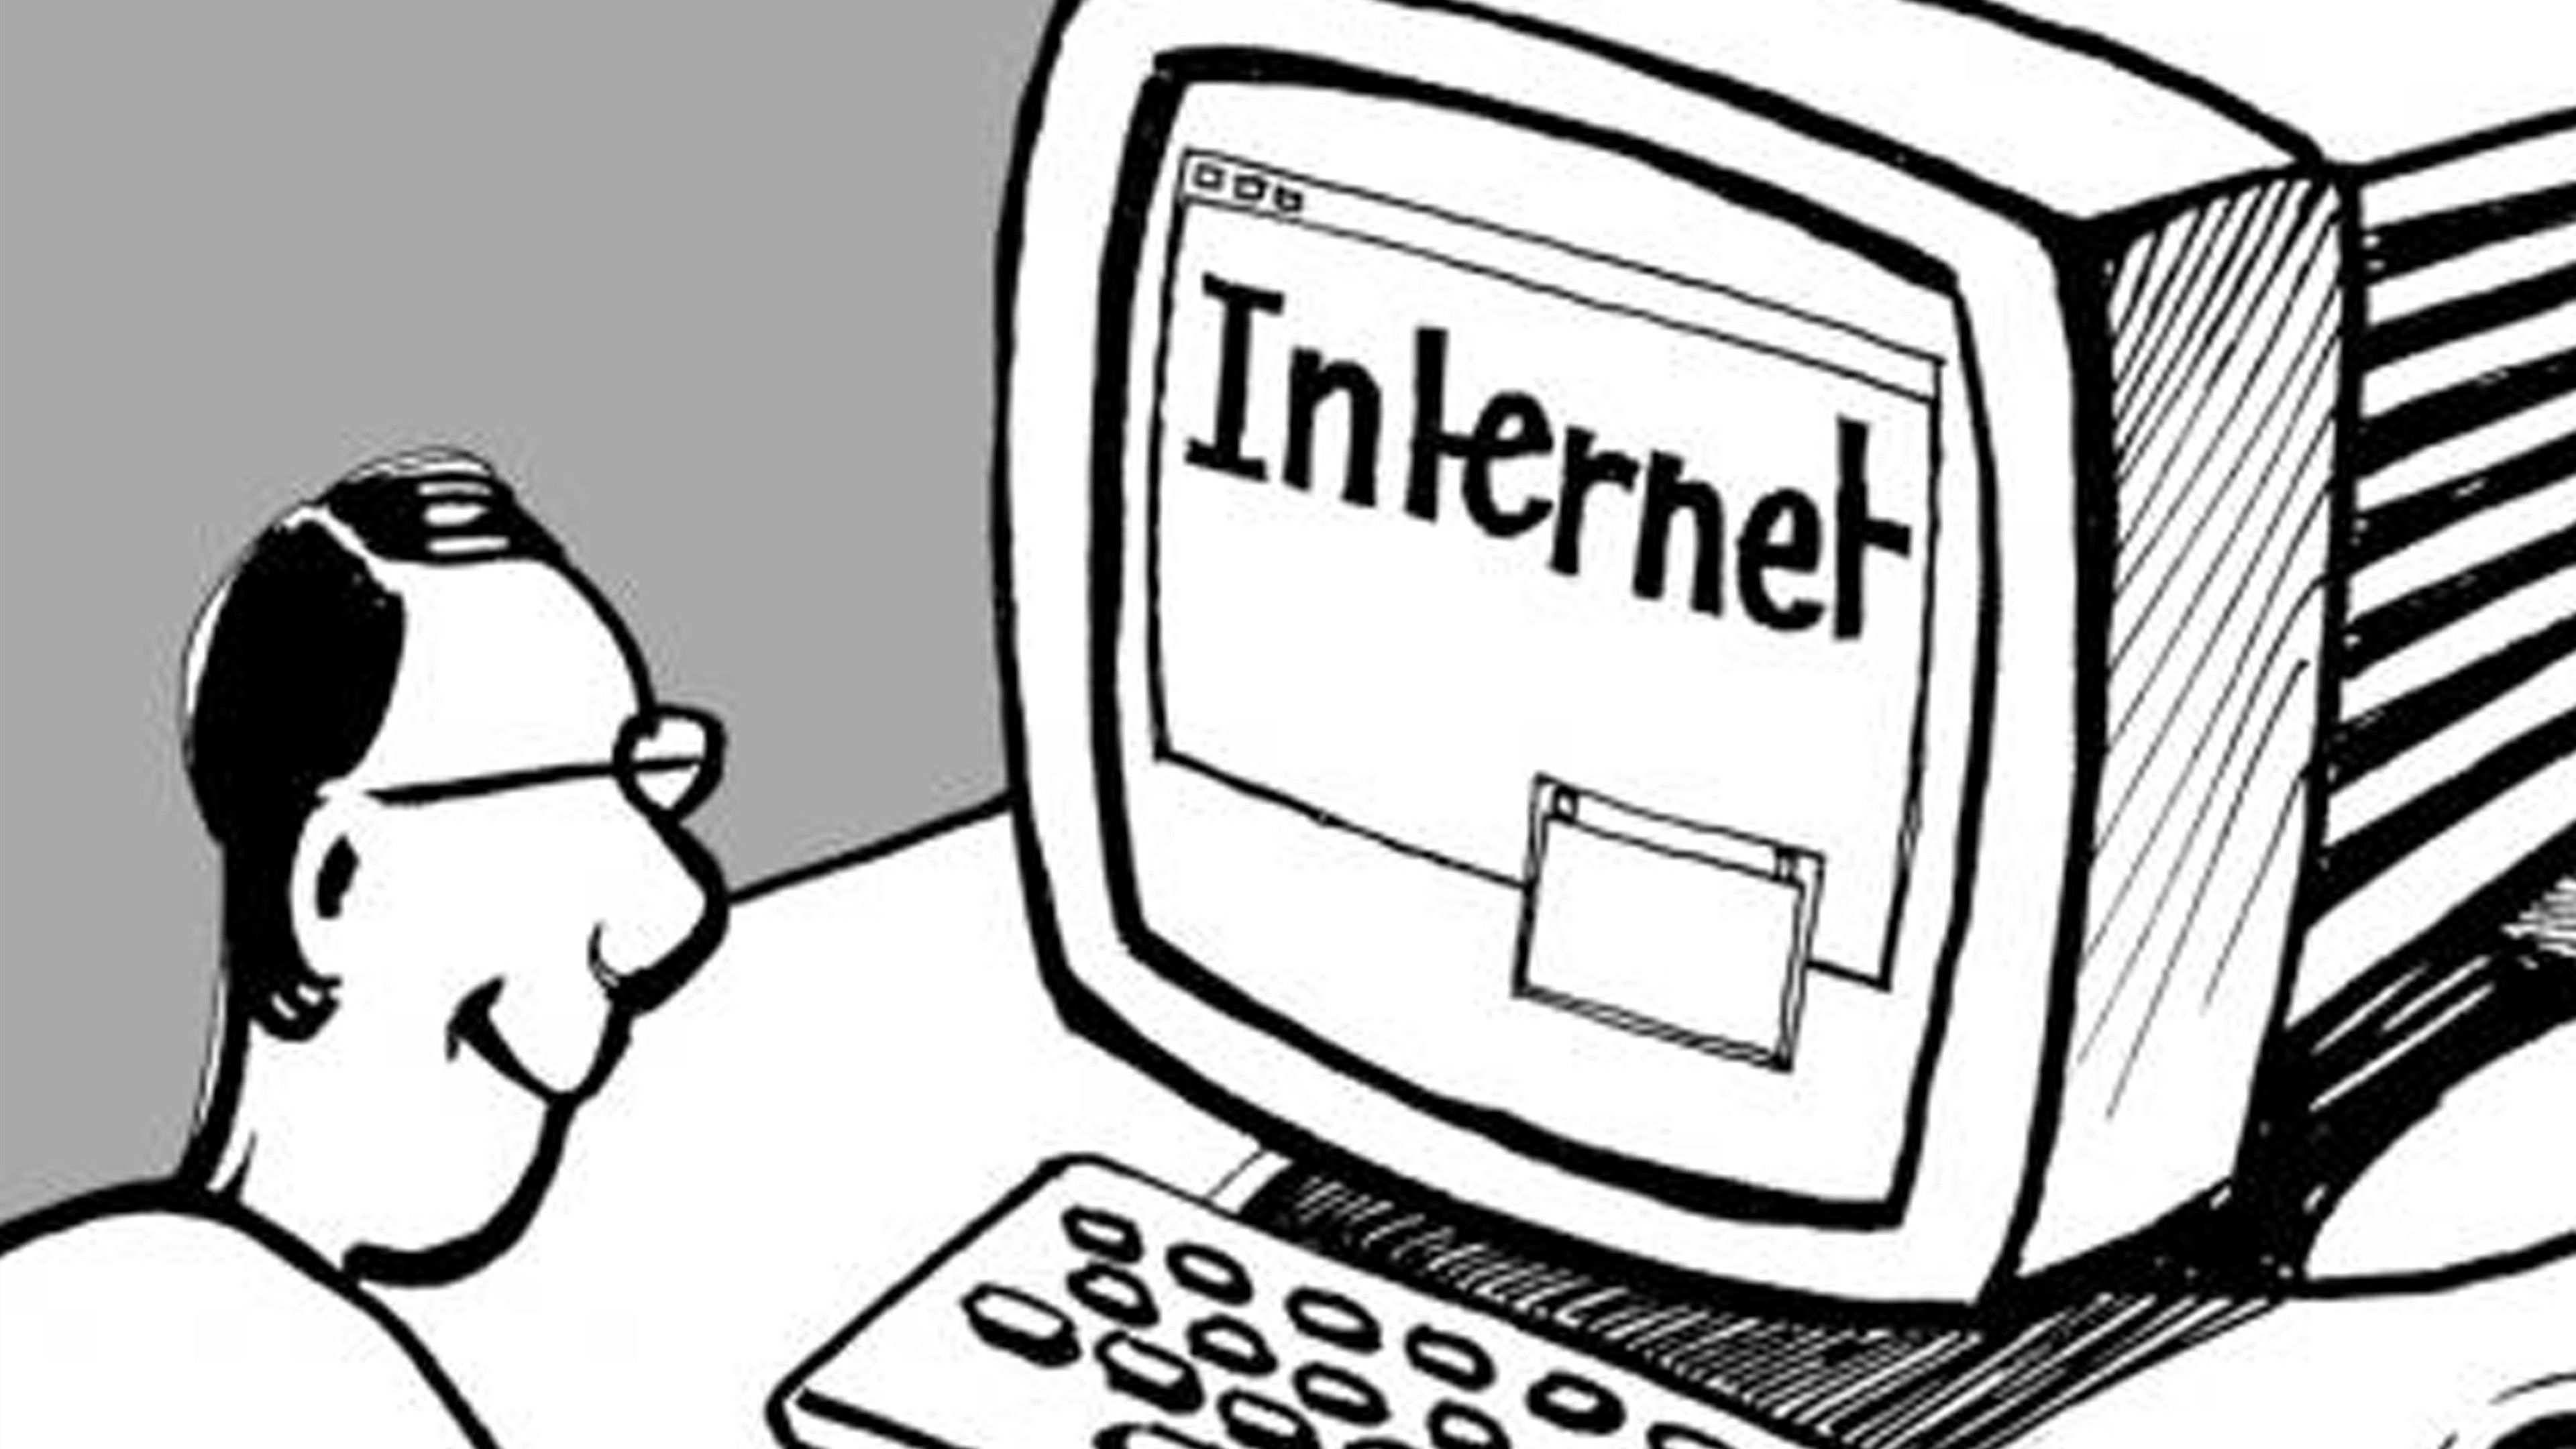 Should The Internet Remain Open?